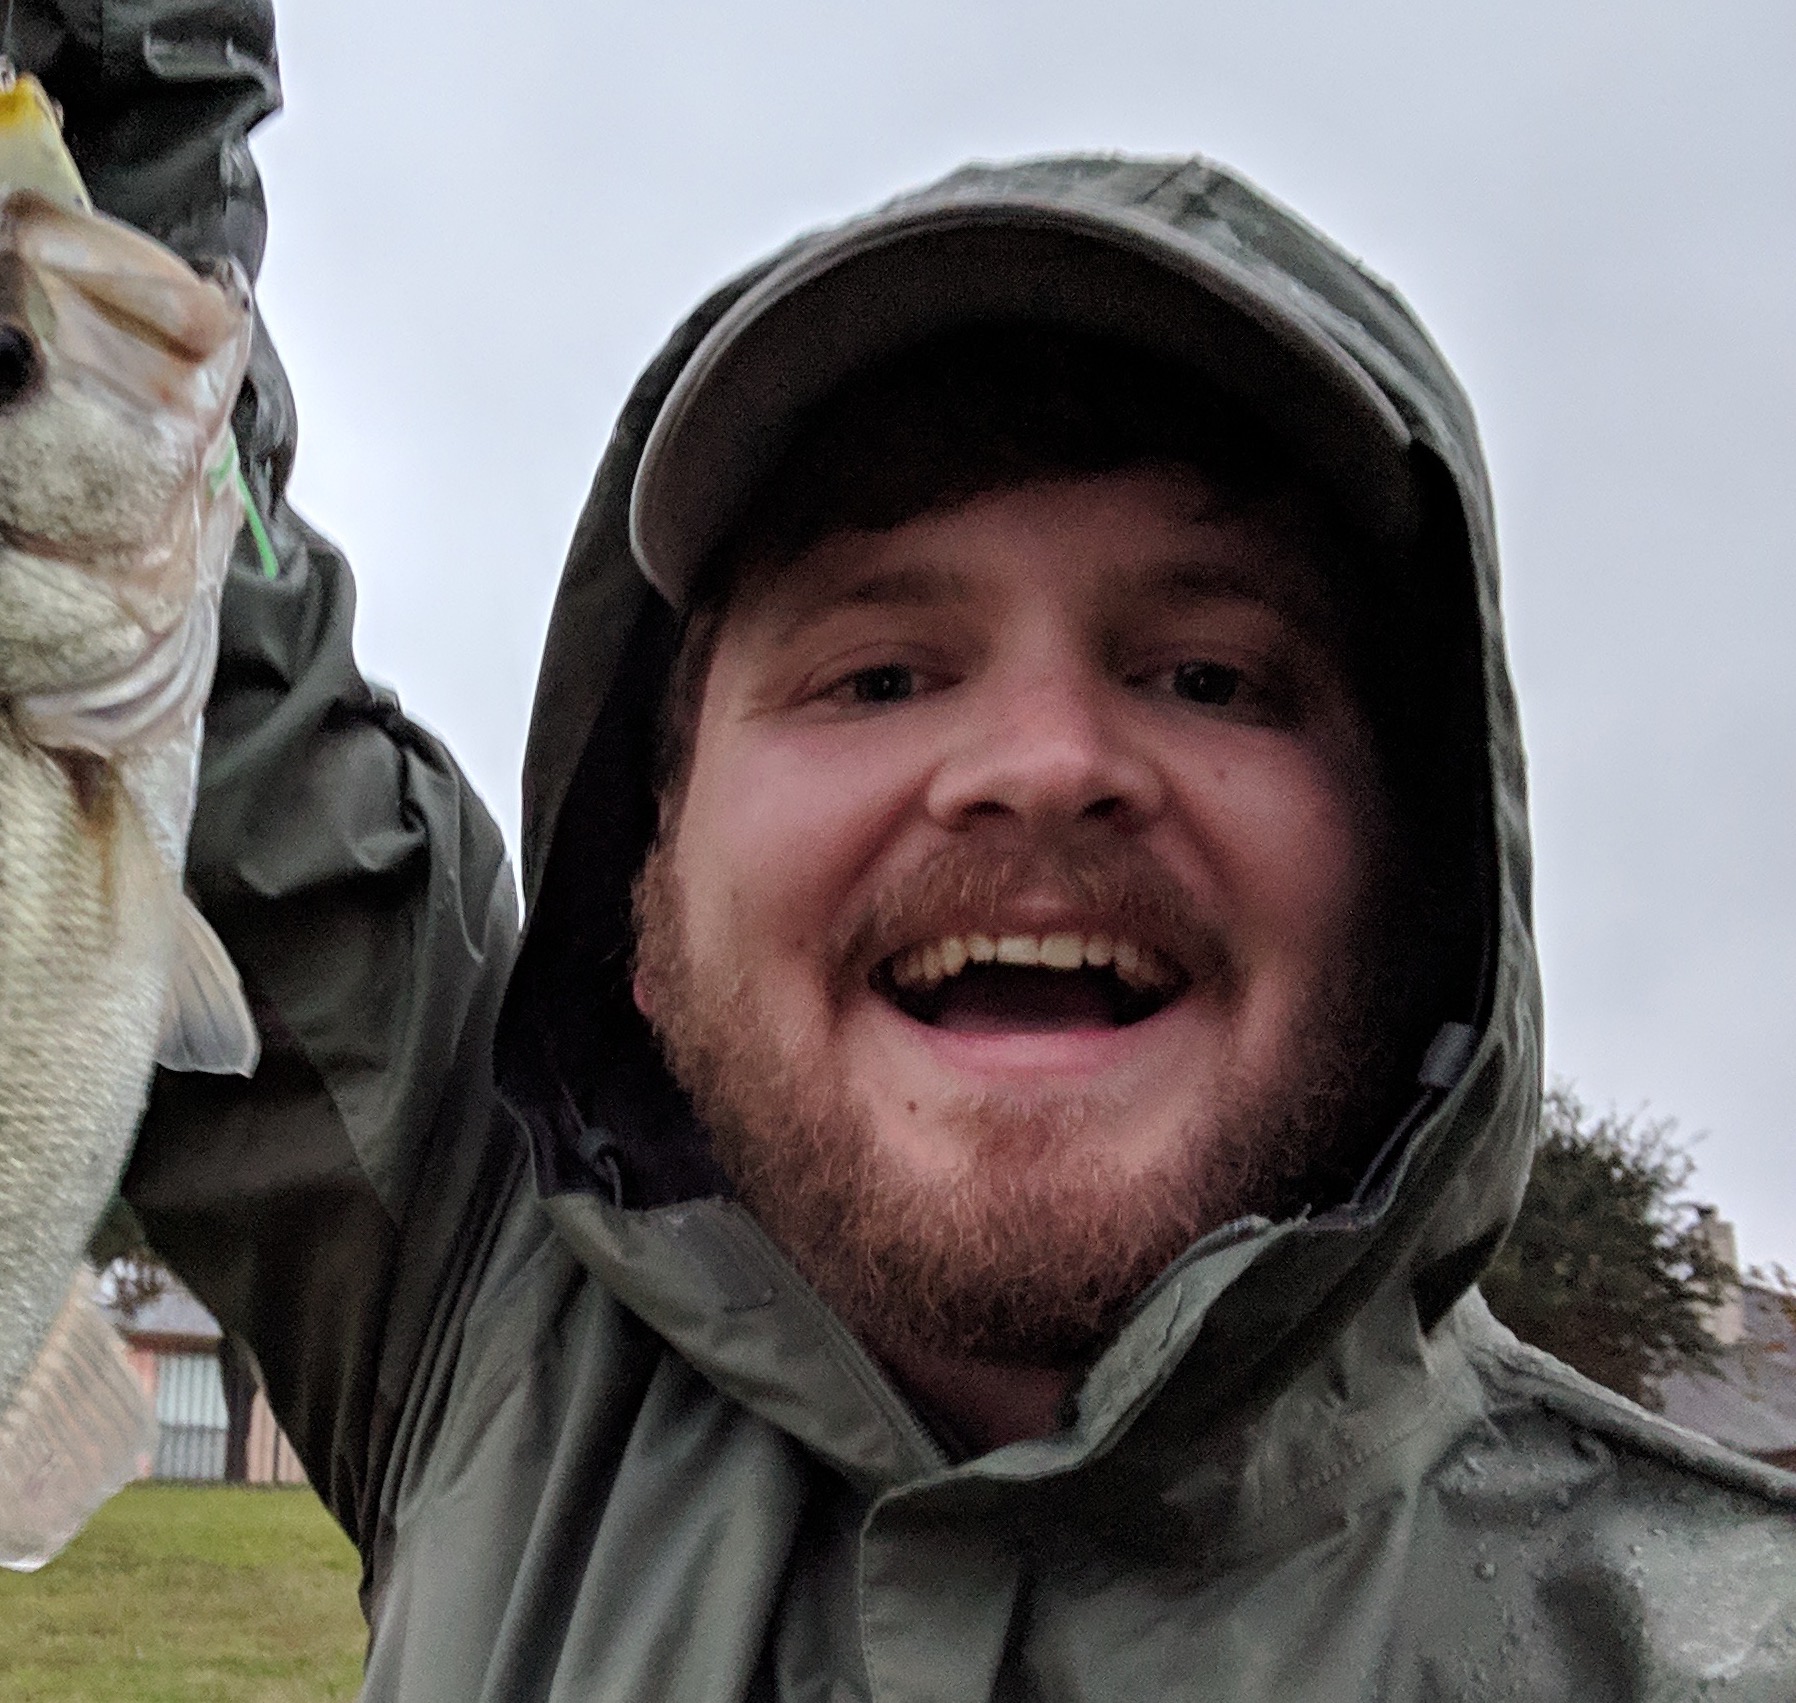 Male holding Bass fish in a raincoat